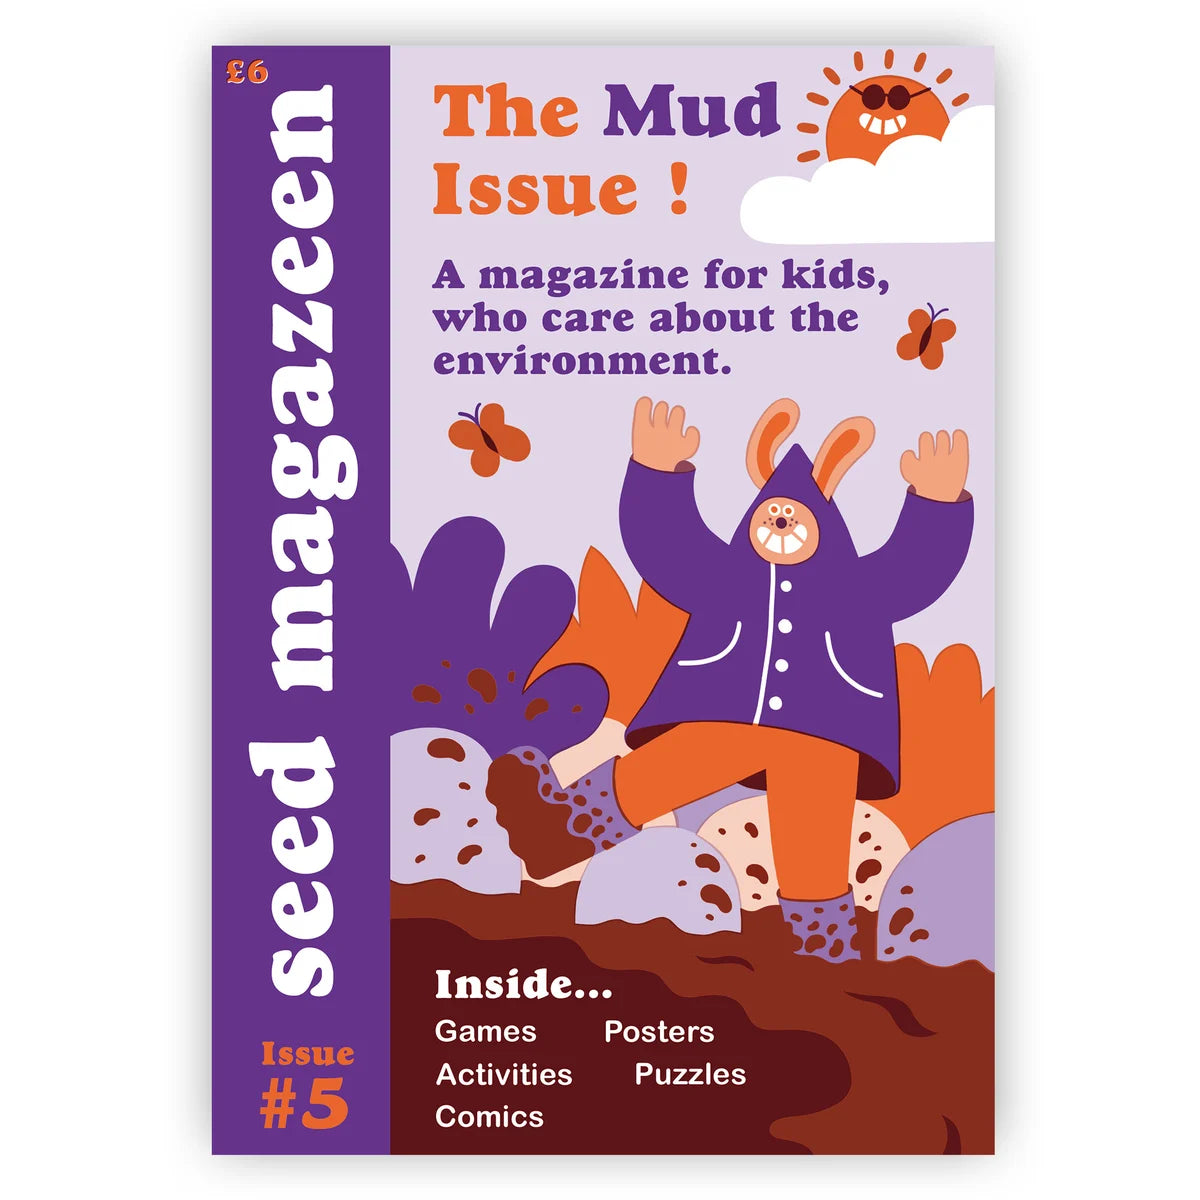 Seed Magazeen #5 - The Mud Issue